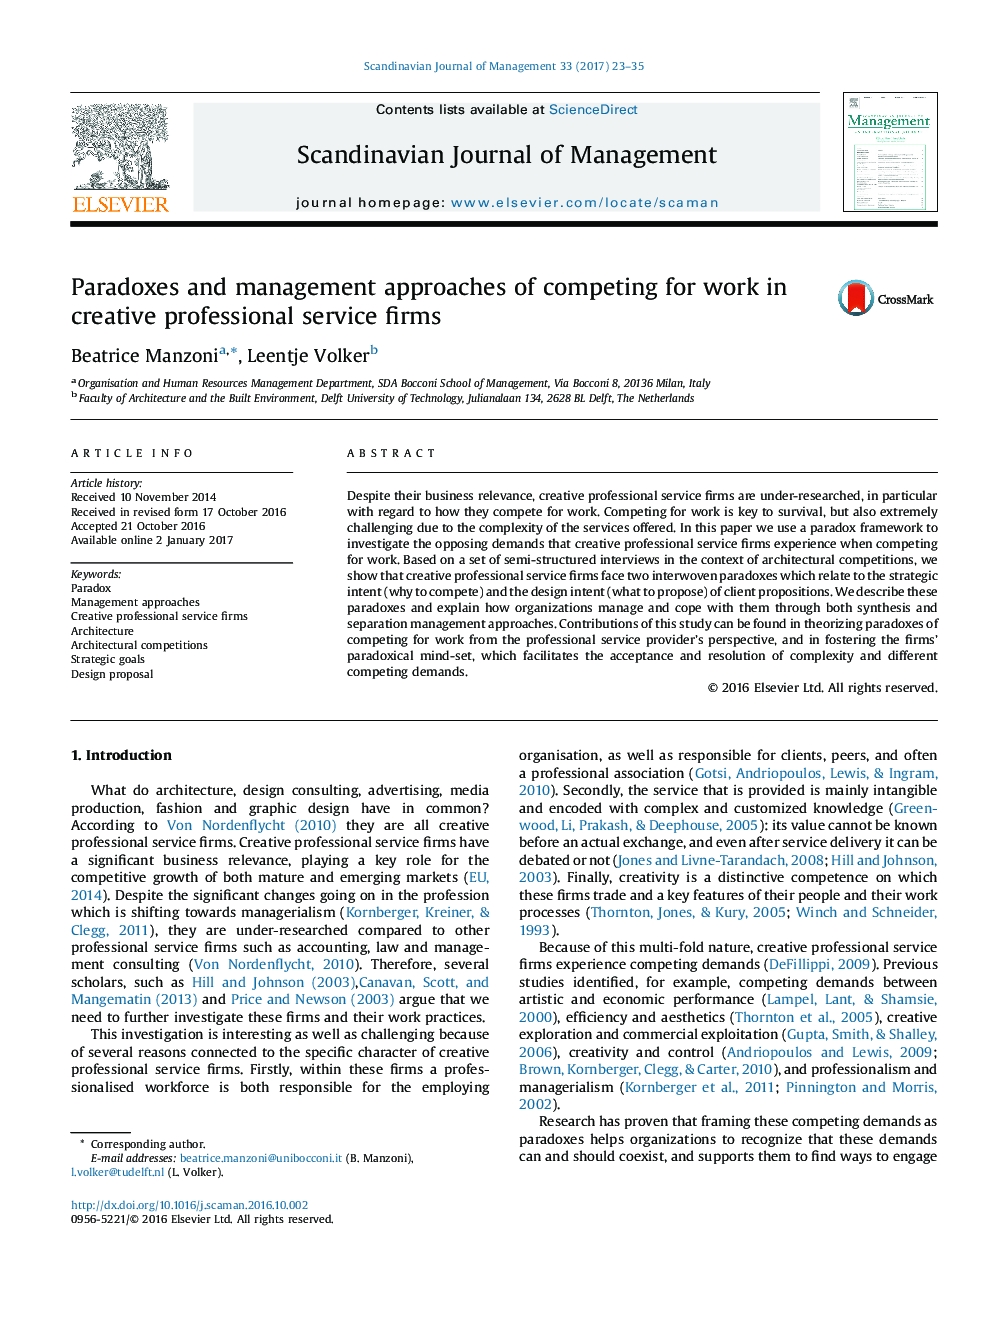 Paradoxes and management approaches of competing for work in creative professional service firms